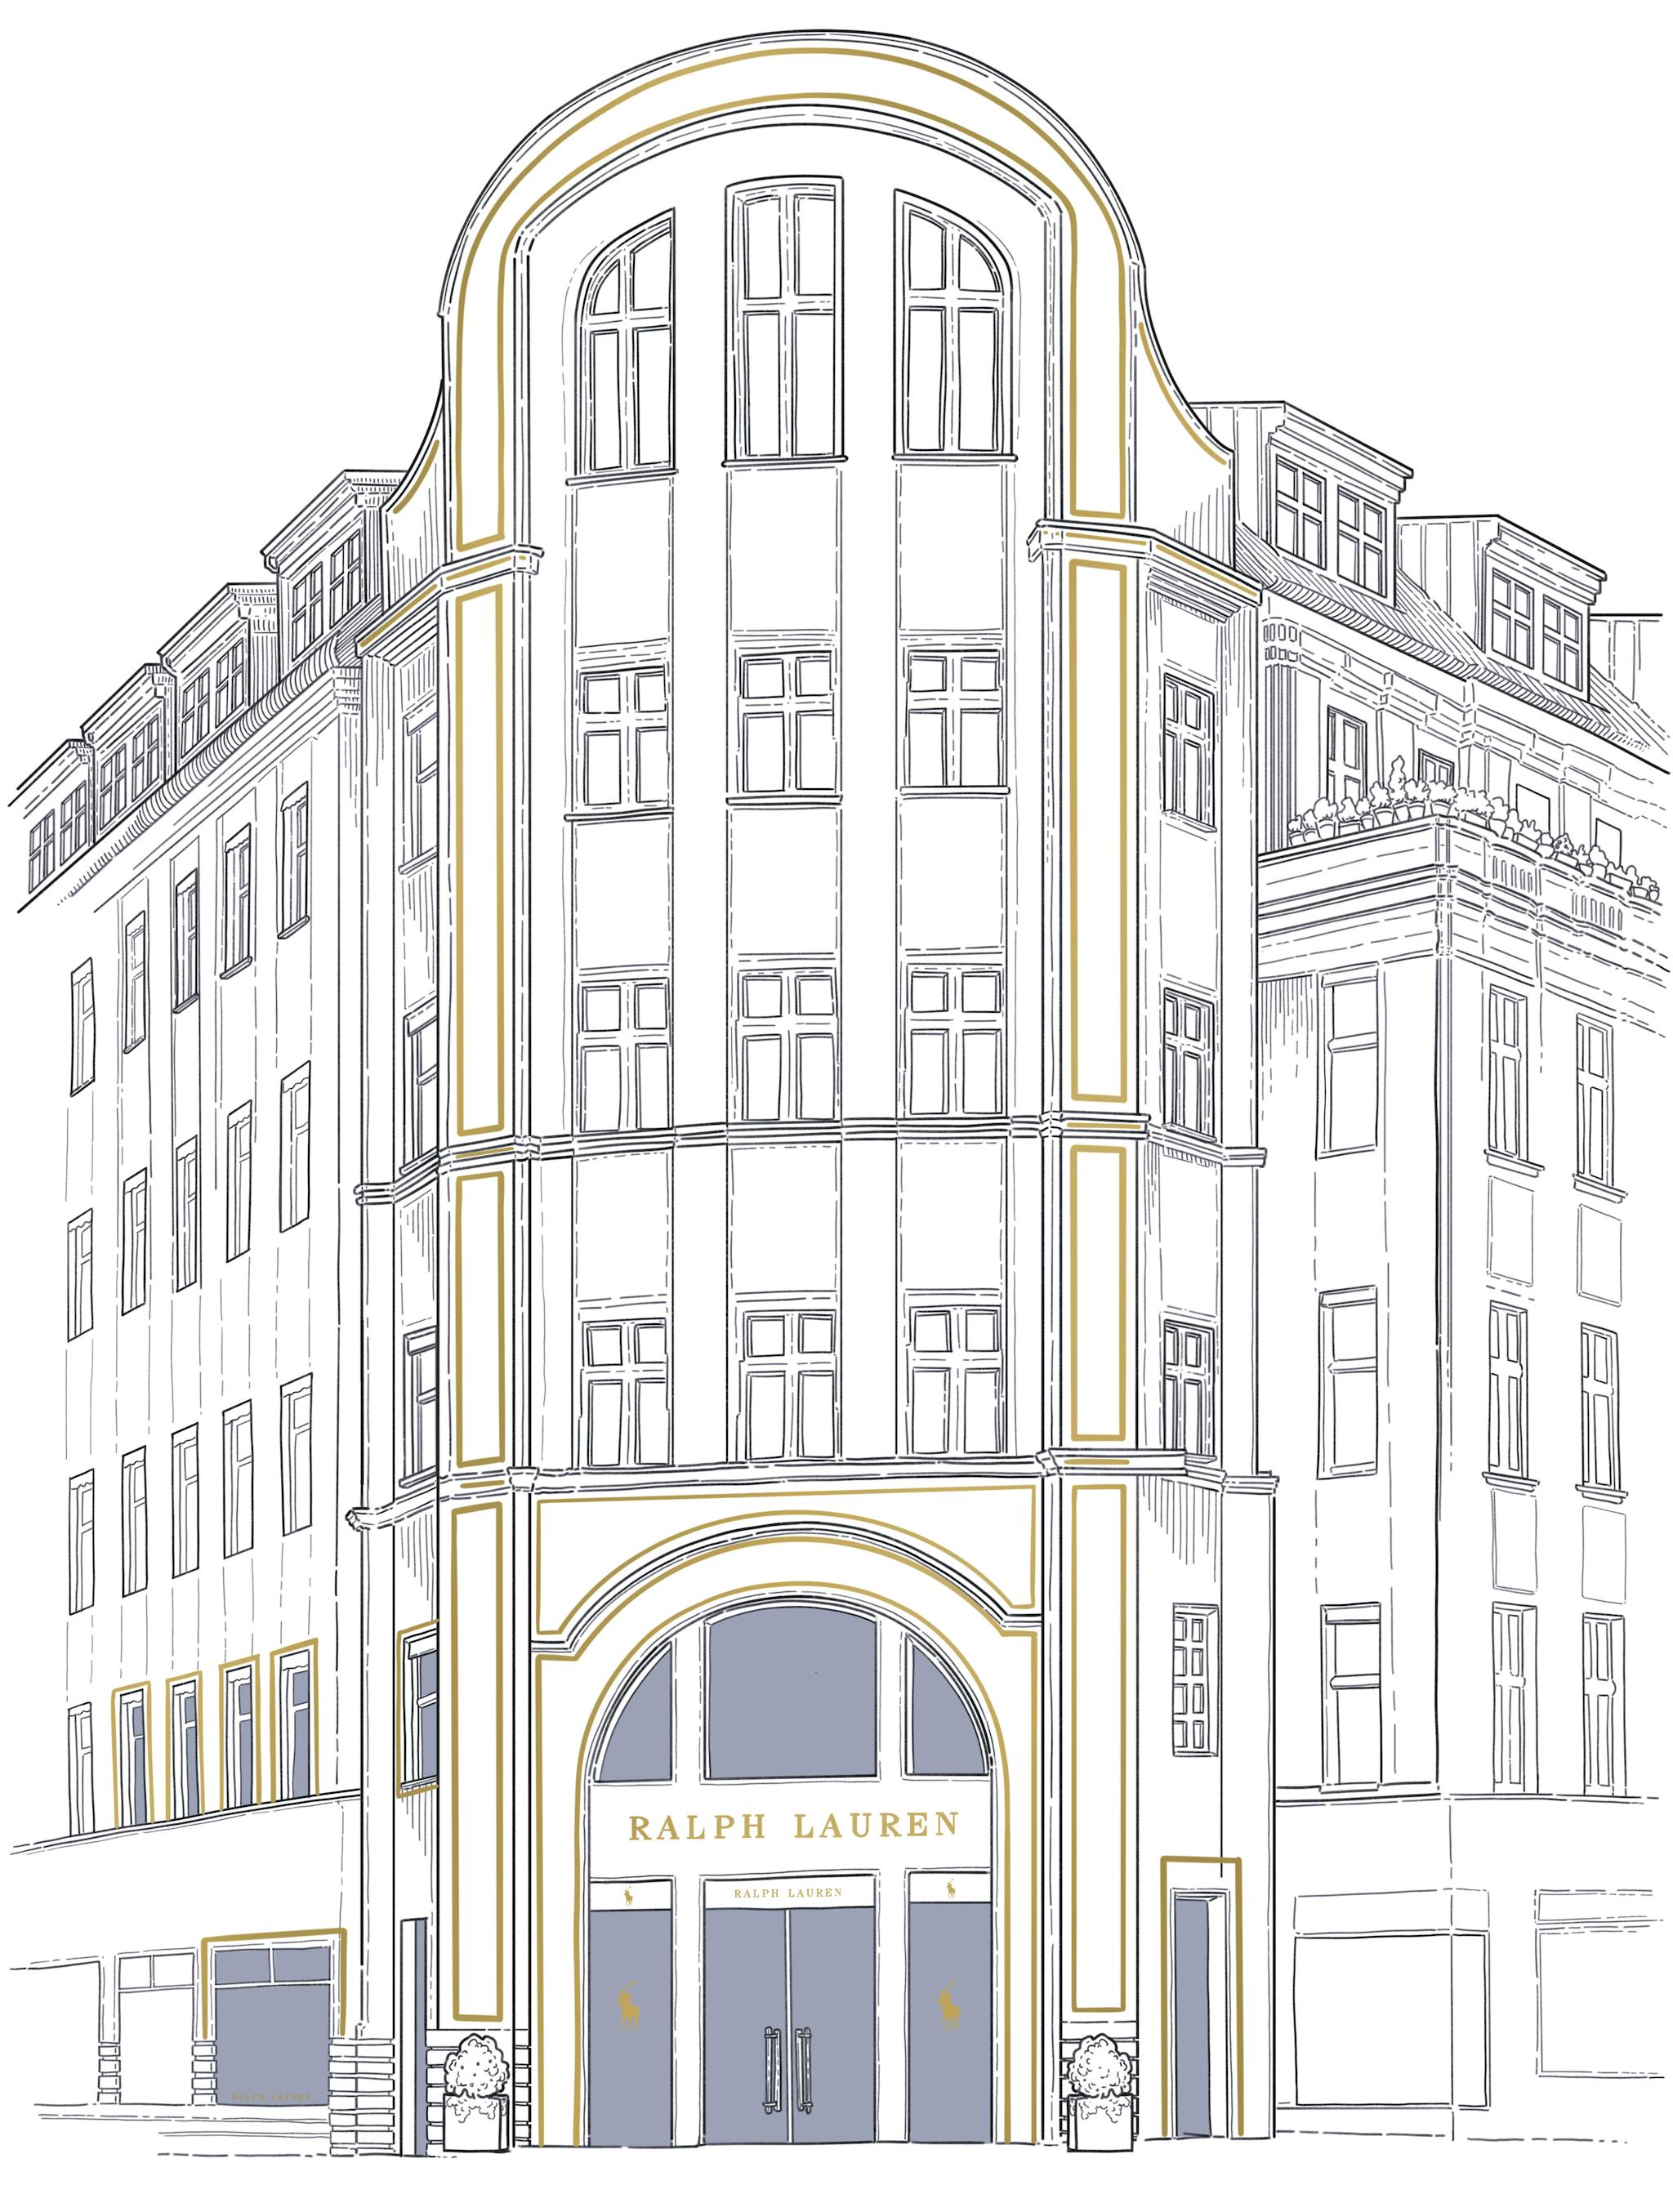 Illustration for Ralph Lauren for a store opening in Berlin. Blue and gold clean lines